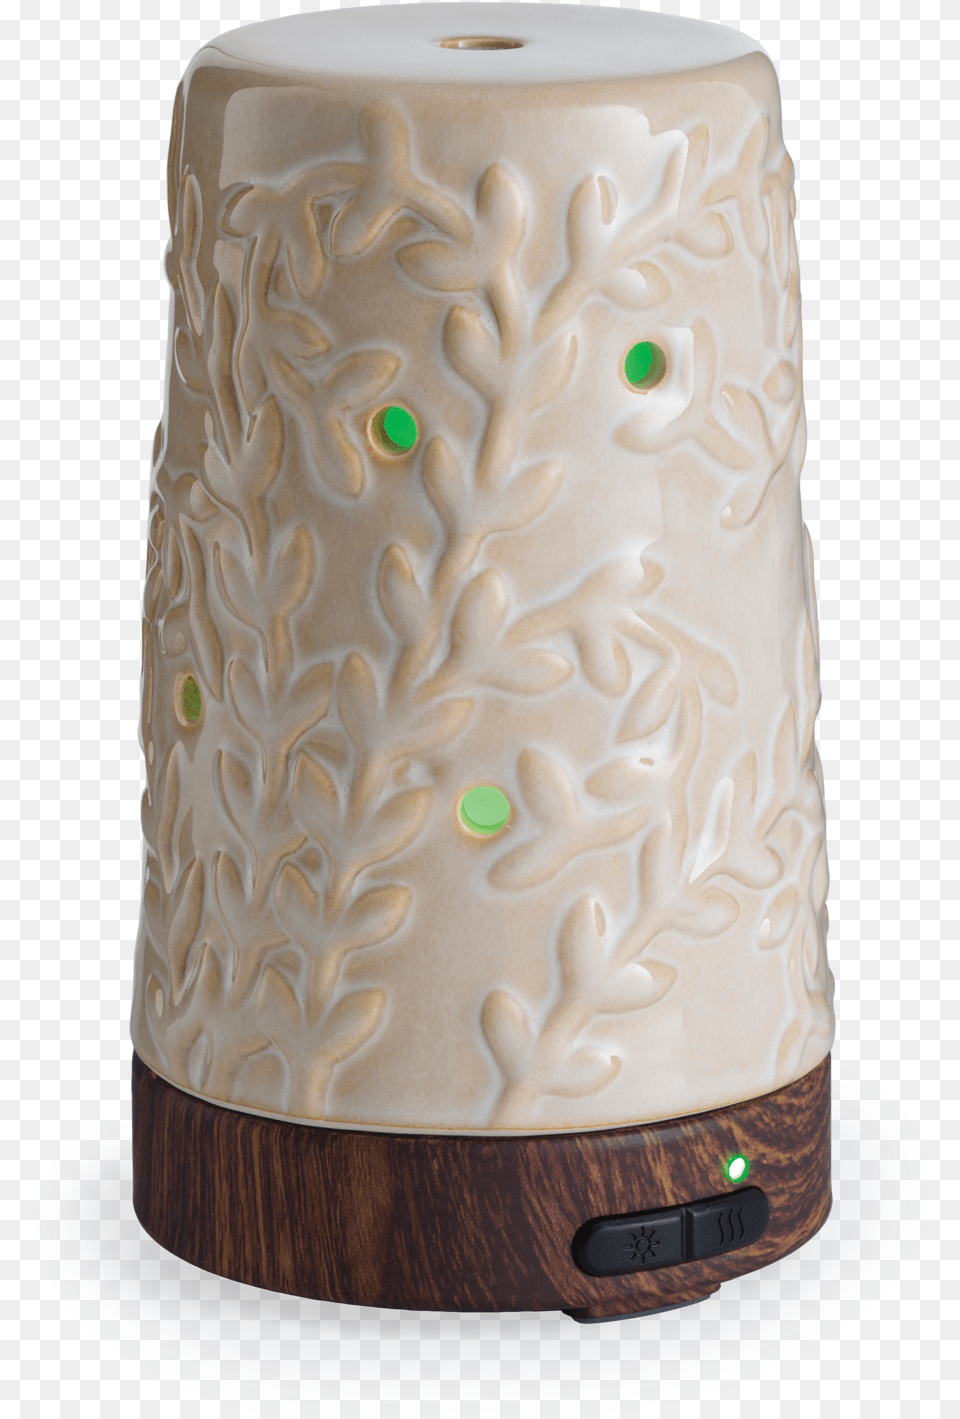 Airome Essential Oil Diffuser, Art, Porcelain, Pottery, Lamp Png